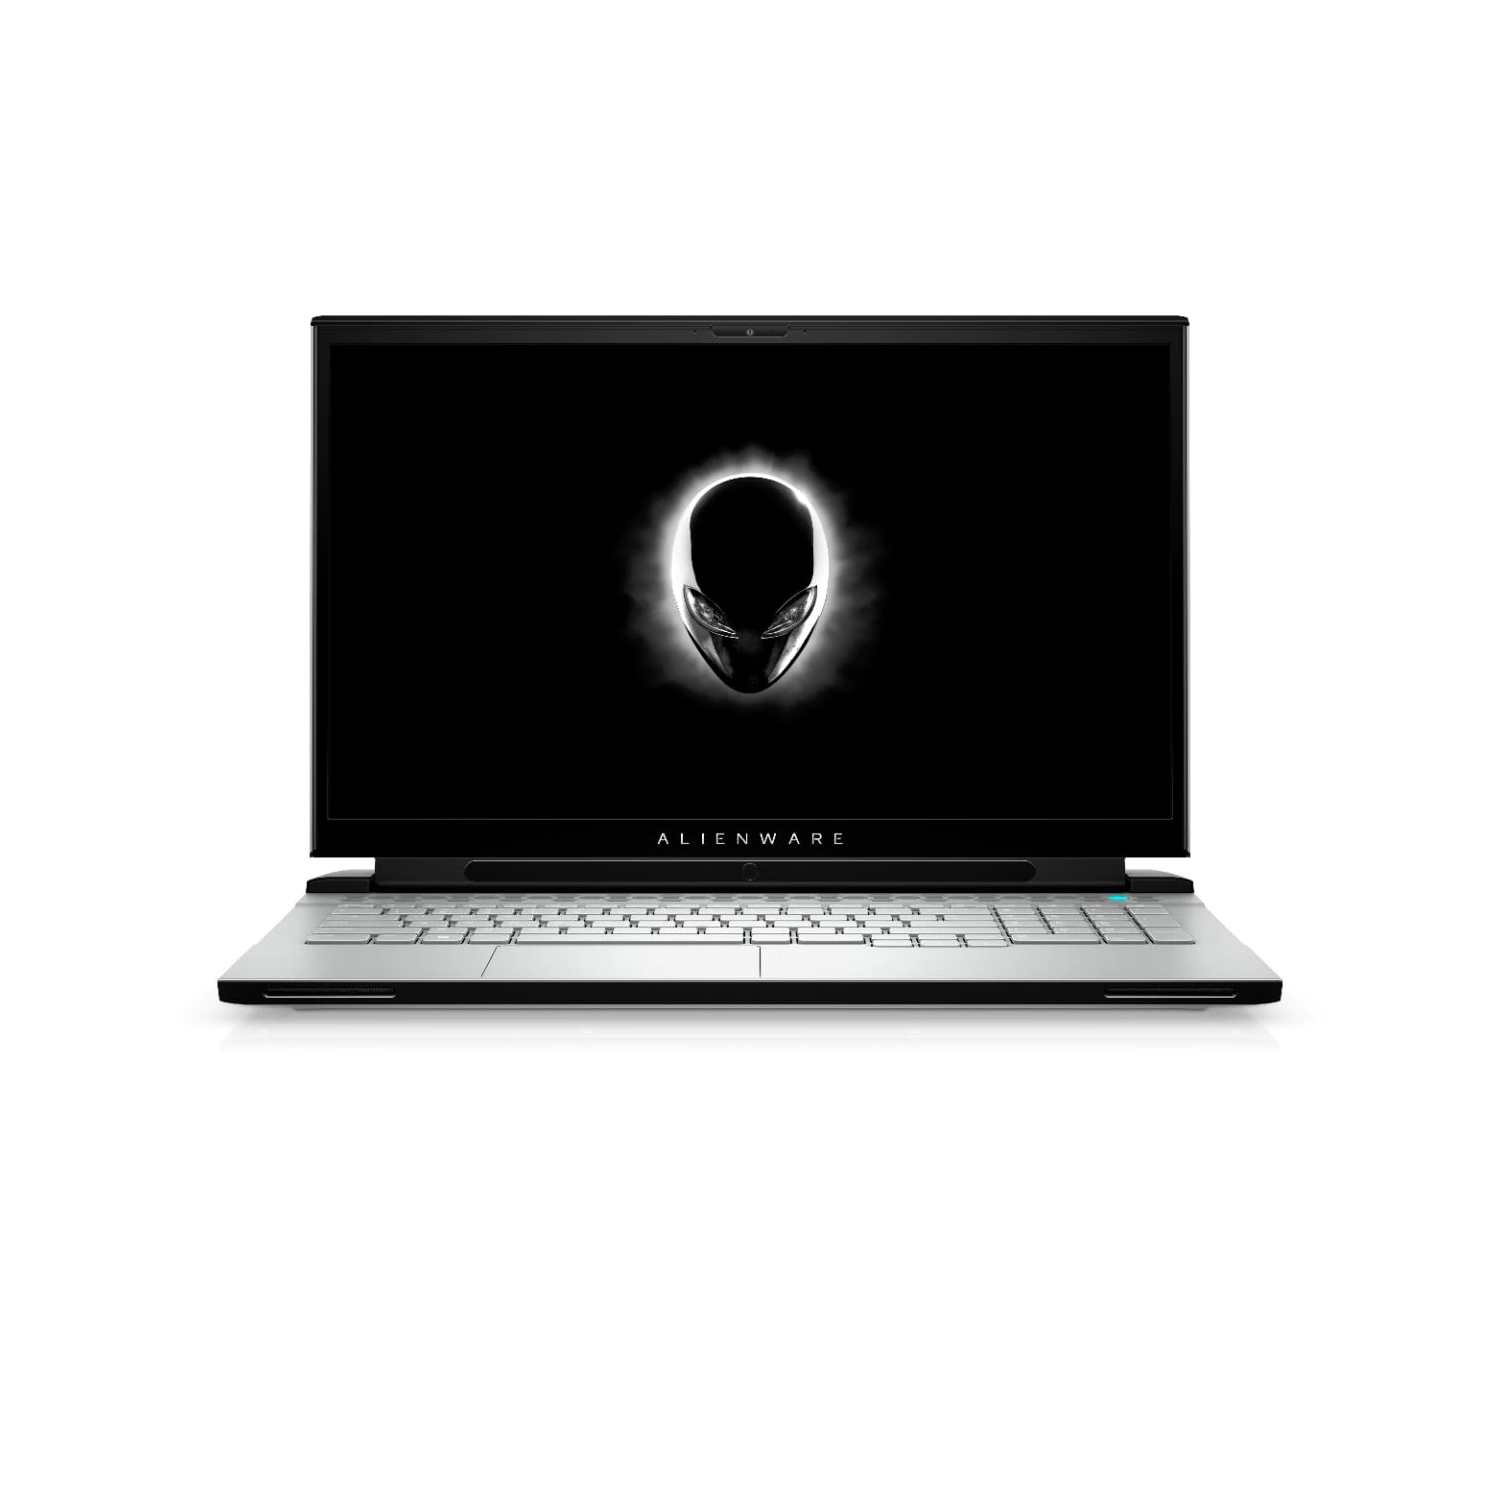 Refurbished (Excellent) - Dell Alienware m17 R3 Gaming Laptop (2020), 17.3" FHD, Core i7, 512GB SSD, 16GB RAM, RTX 2060, 6 Cores @ 5 GHz, 10th Gen CPU Certified